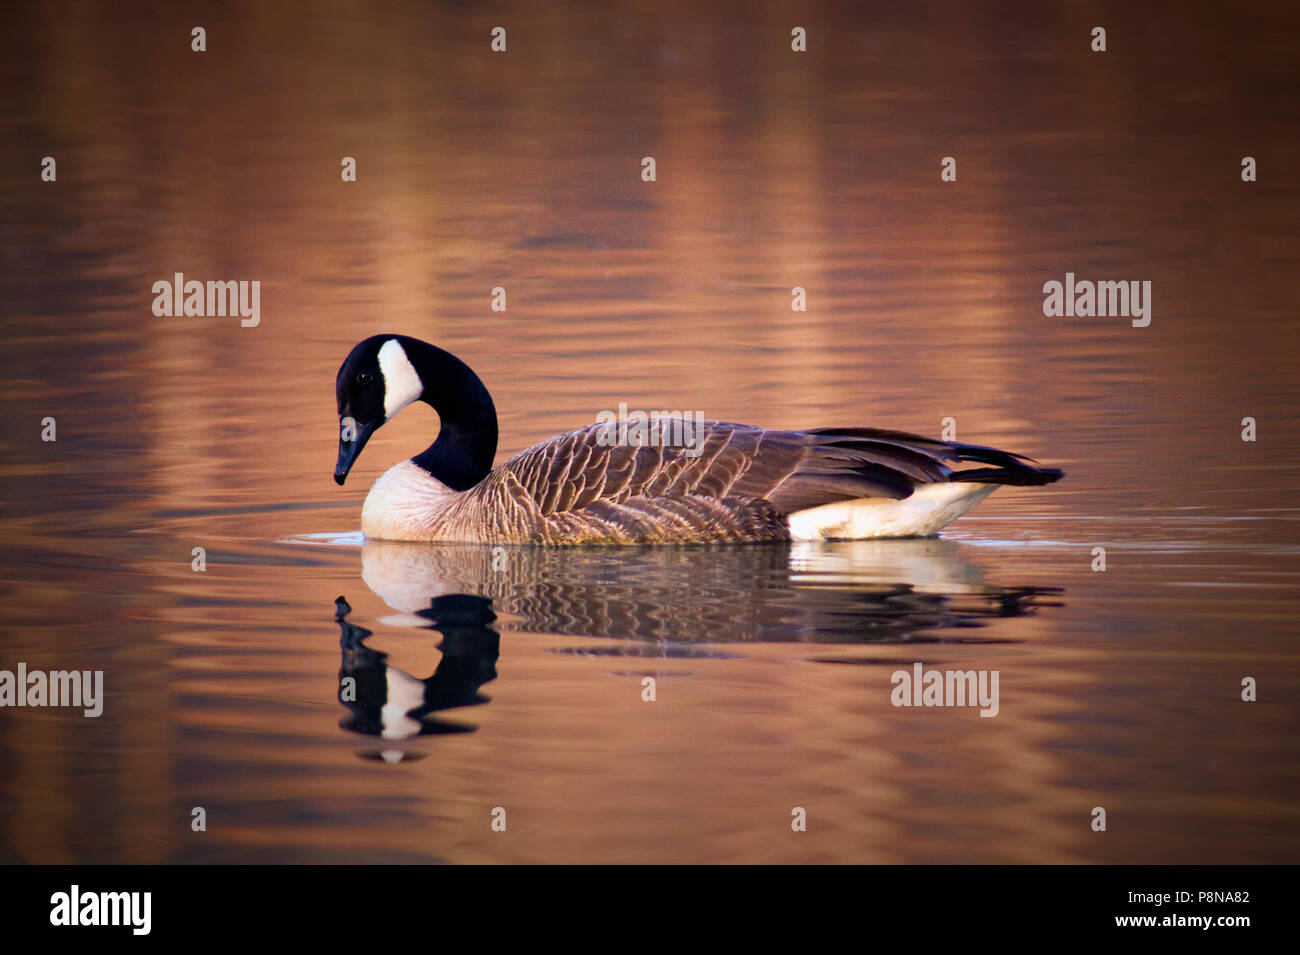 A Canadian goose silhouetted against warm autumn tones reflected in the water on a frosty morning. Stock Photo